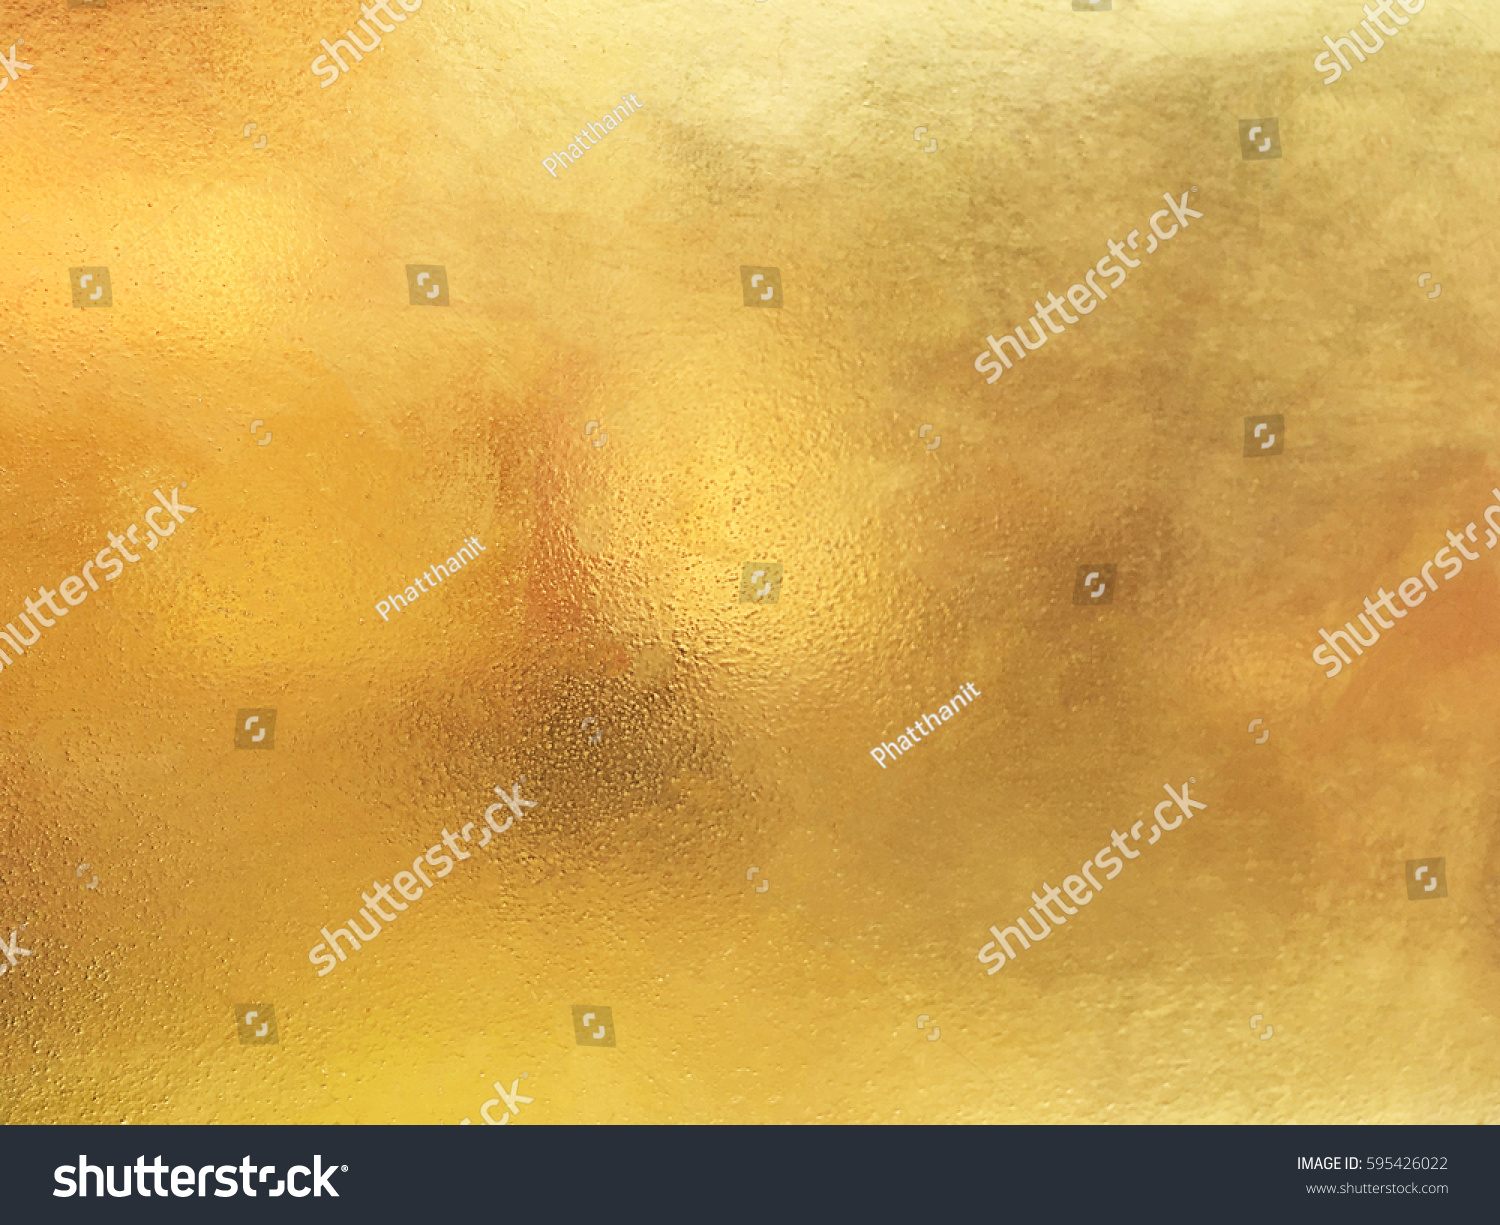 Gold background or texture and gradients shadow. #595426022